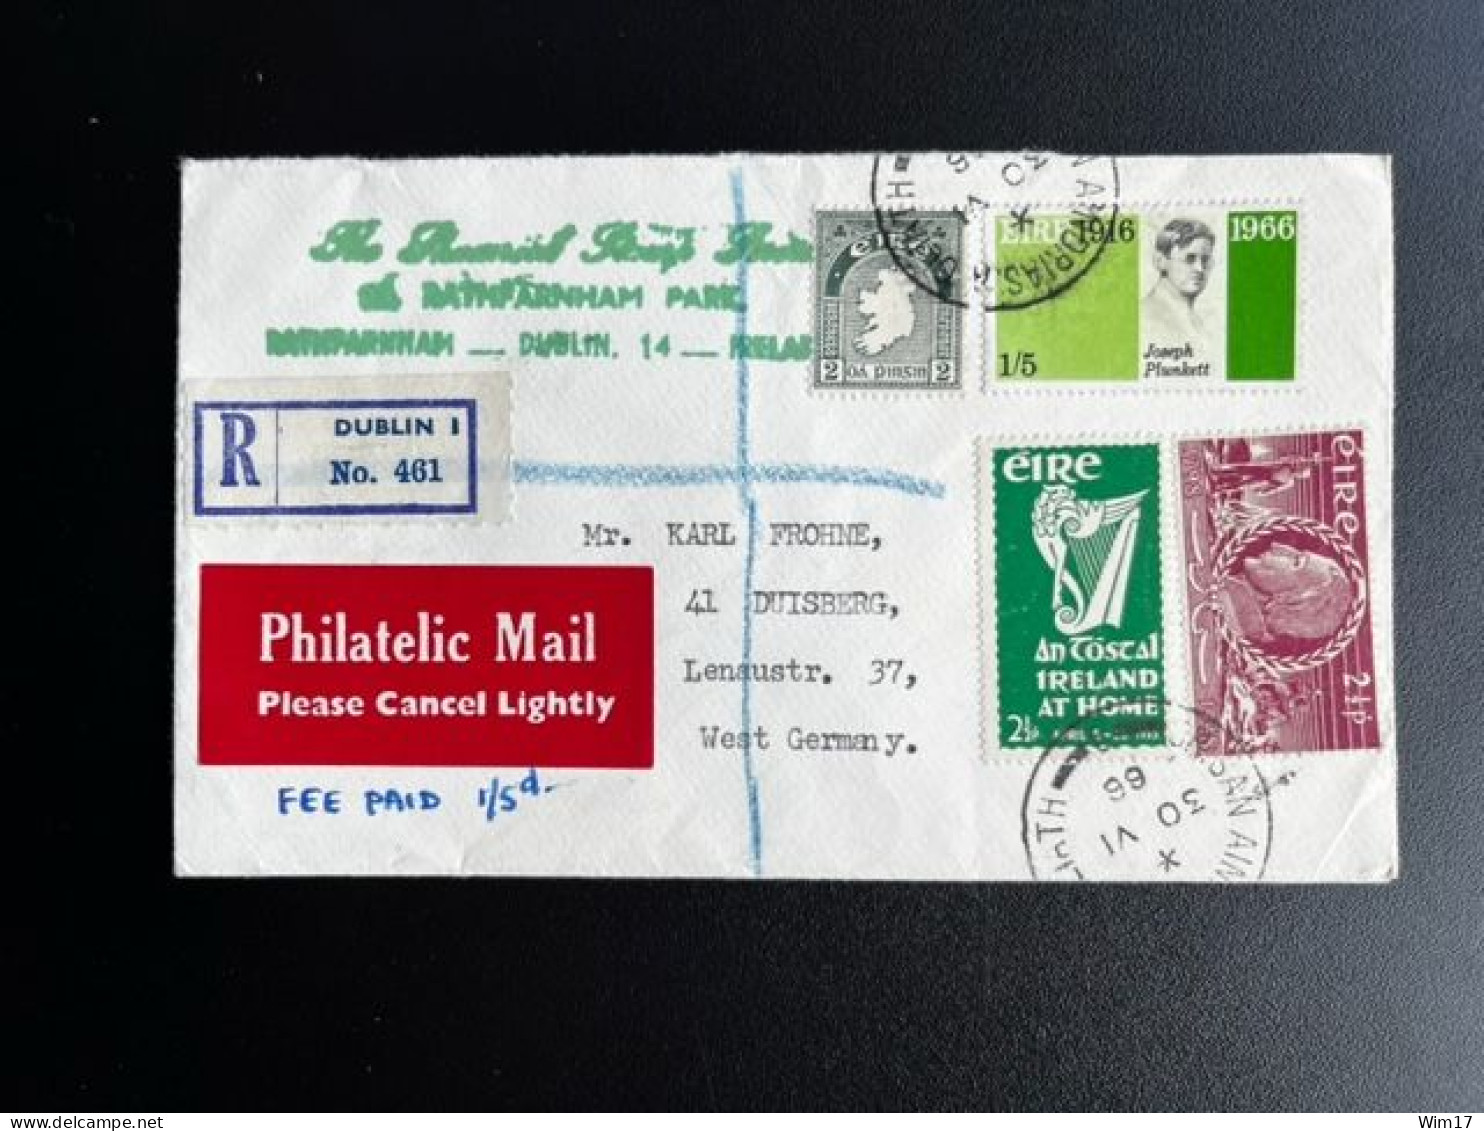 IRELAND 1966 REGISTERED LETTER DUBLIN TO DUISBURG 30-06-1966 IERLAND EIRE - Covers & Documents